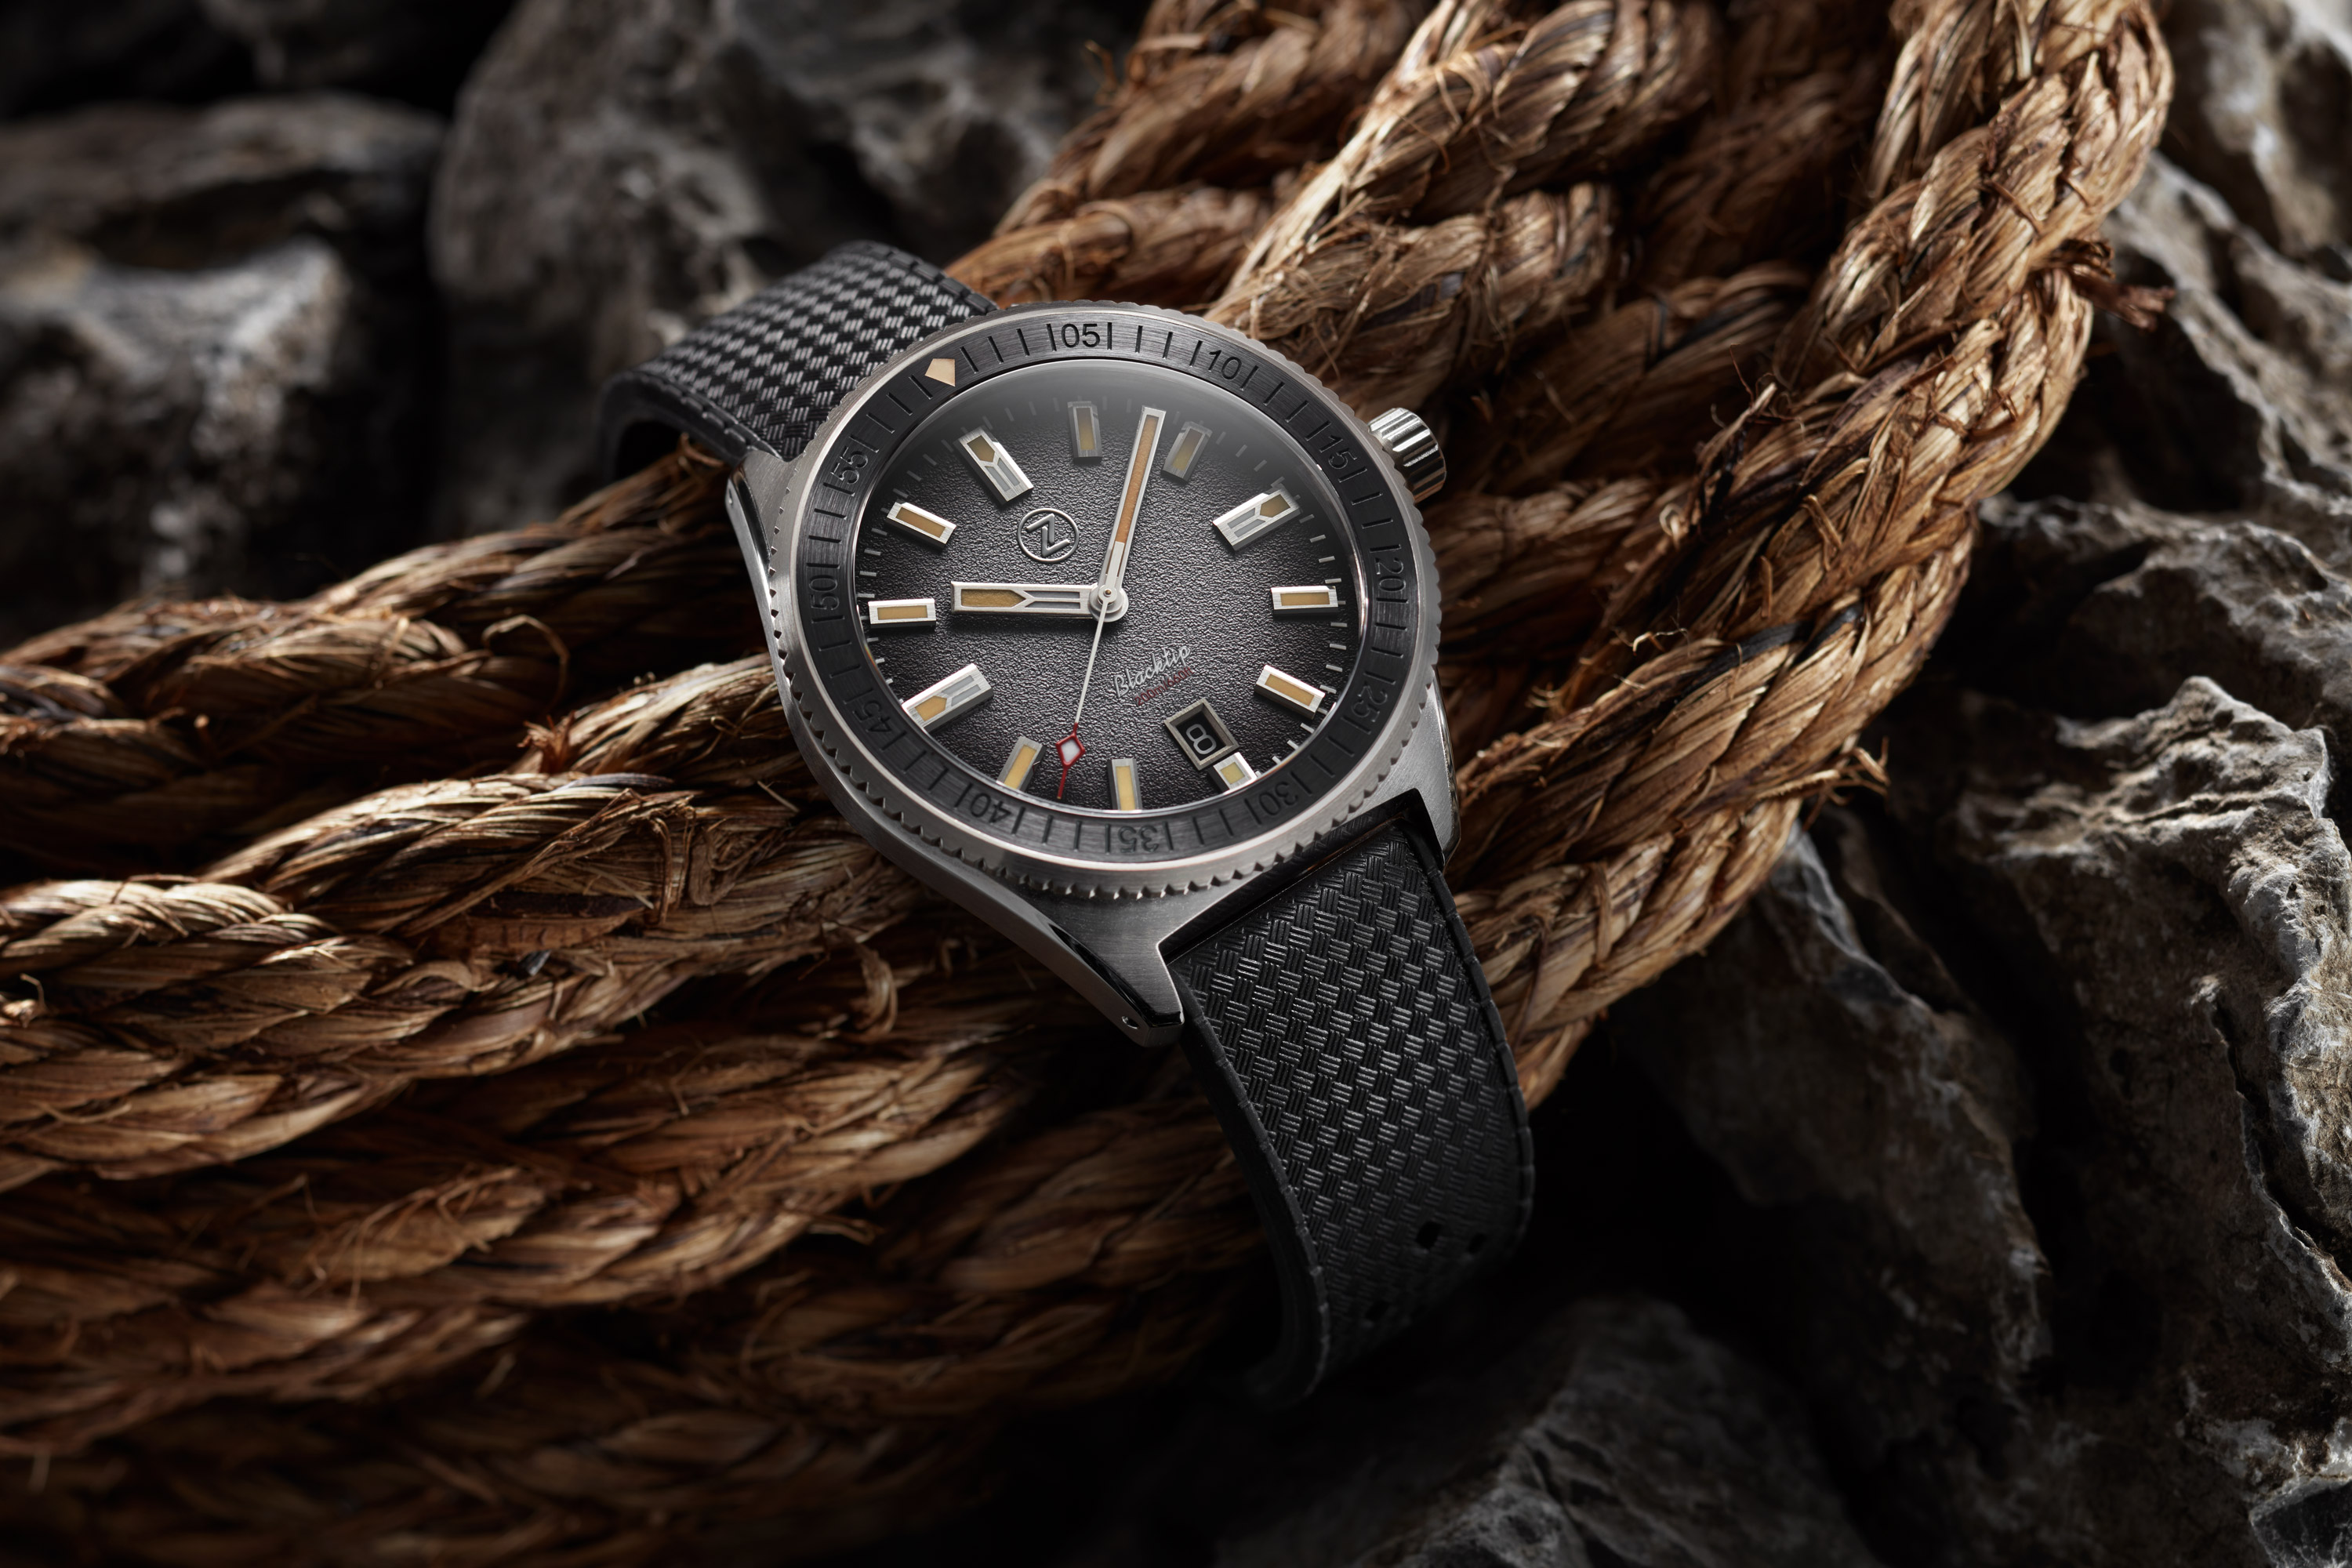 INTRODUCING: The Zelos Watches Blacktip 200m is one of the best-value  divers around